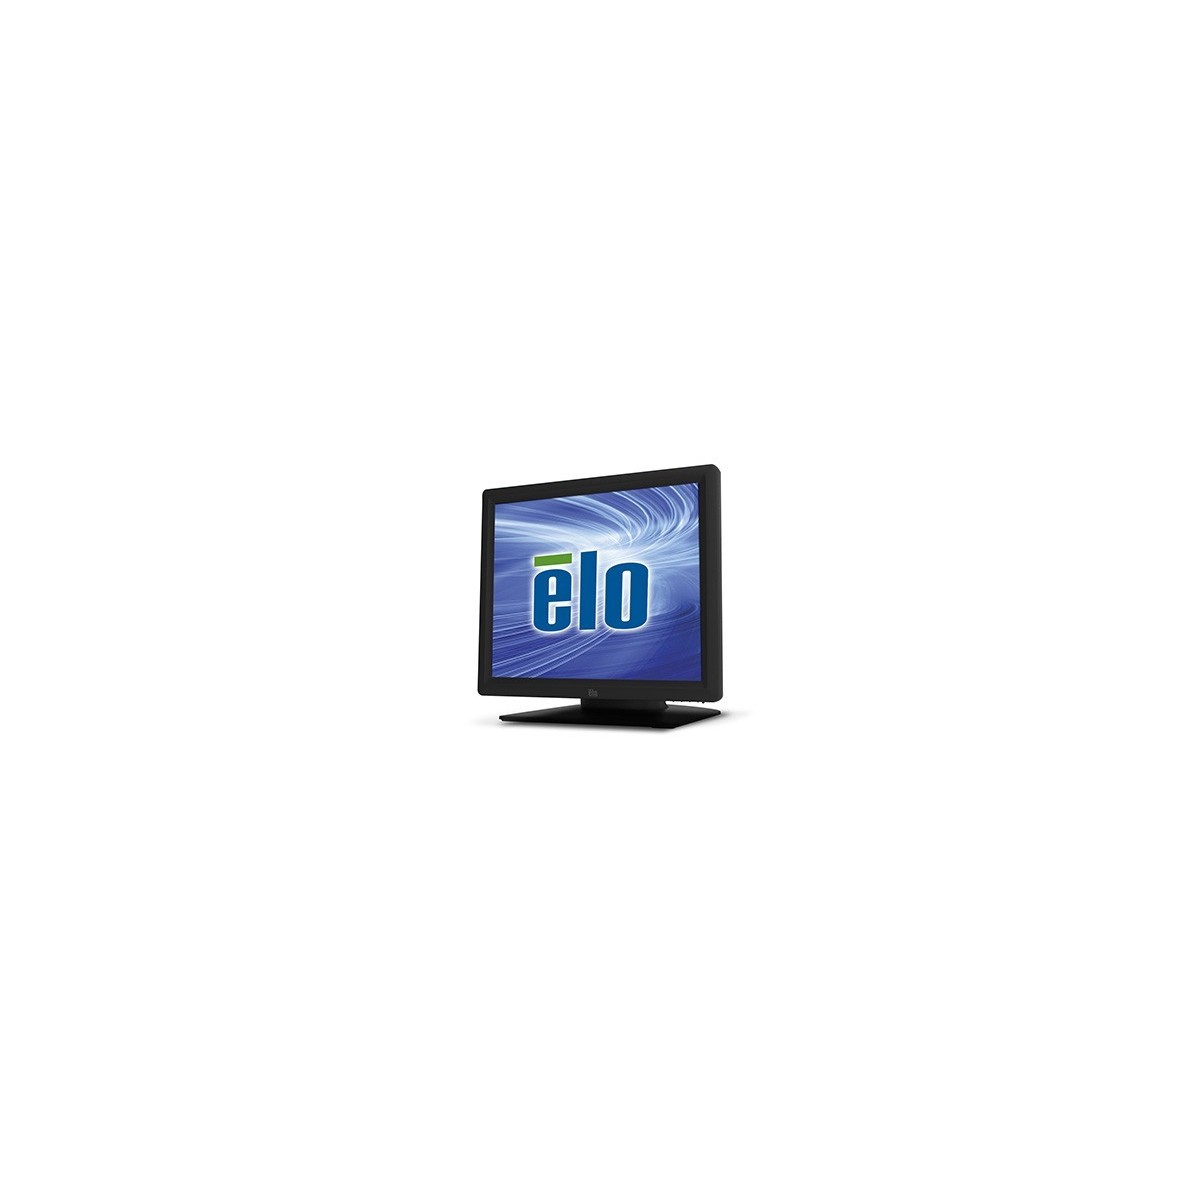 Elo Touch Solutions Elo Touch Solution 1717L Rev B - 43.2 cm (17) - 225 cd/m² - 5:4 - 1280 x 1024 pixels - LCD - 5:4